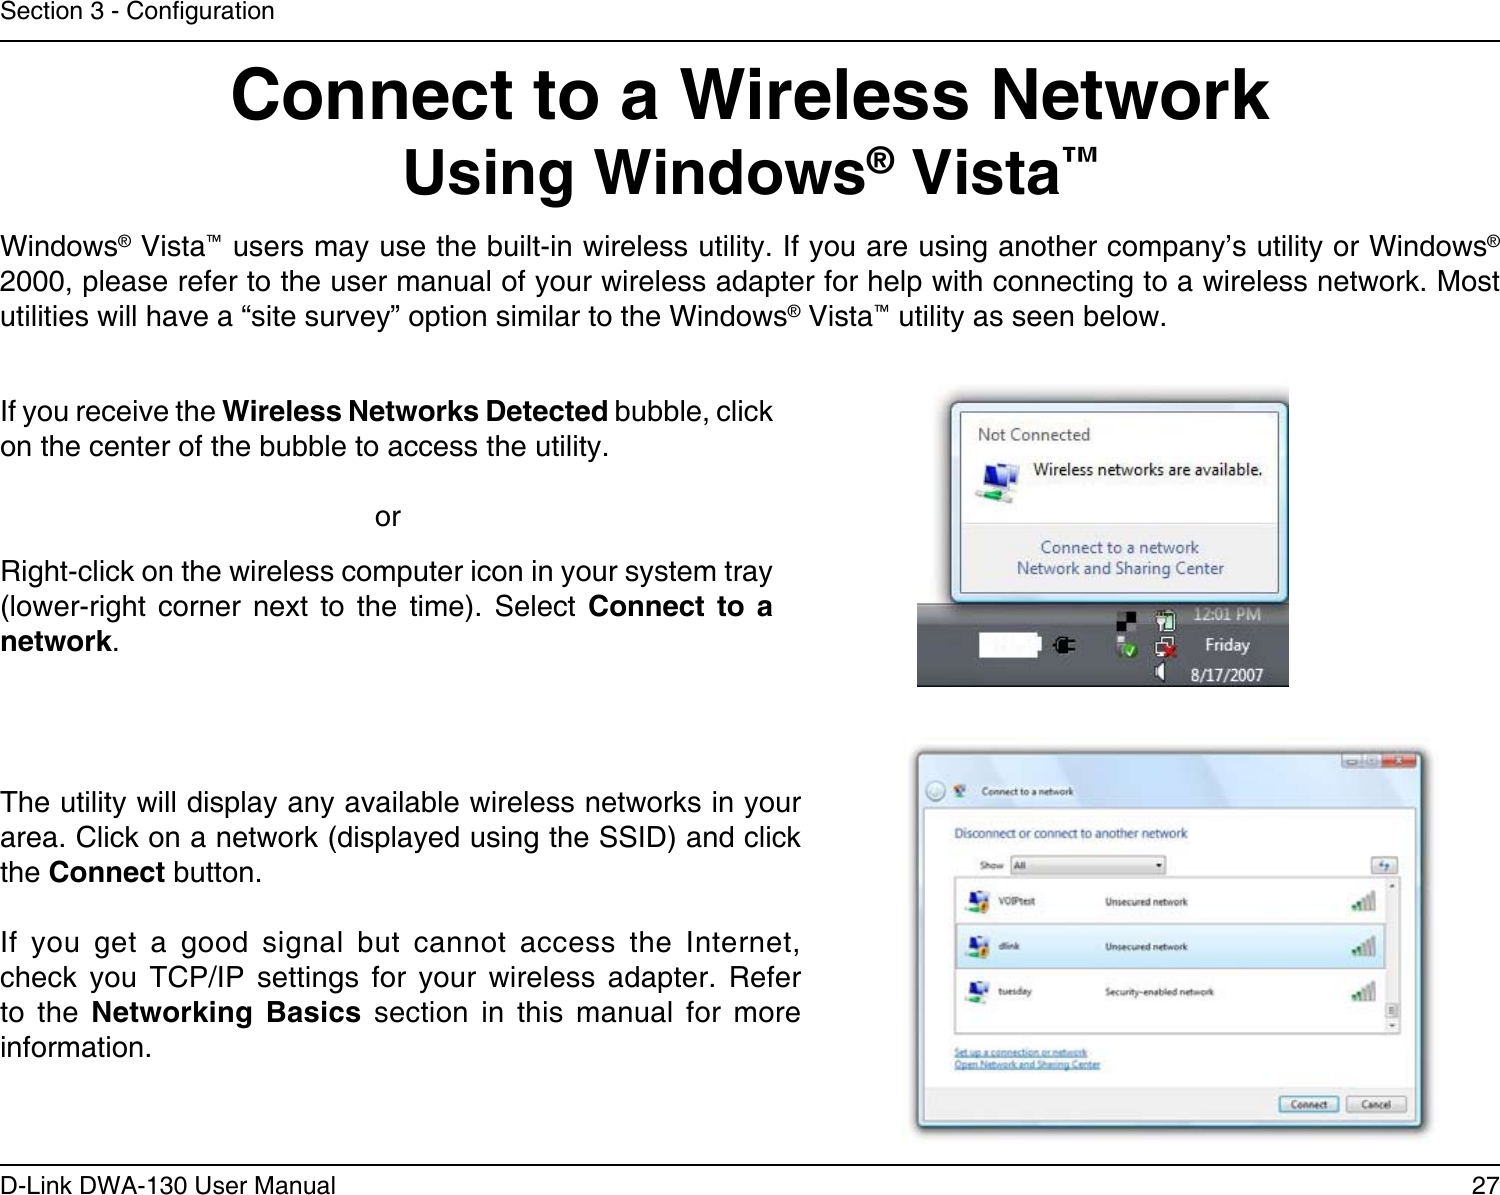 27D-Link DWA-130 User ManualSection 3 - CongurationConnect to a Wireless NetworkUsing Windows® Vista™Windows® Vista™ users may use the built-in wireless utility. If you are using another company’s utility or Windows® 2000, please refer to the user manual of your wireless adapter for help with connecting to a wireless network. Most utilities will have a “site survey” option similar to the Windows® Vista™ utility as seen below.Right-click on the wireless computer icon in your system tray (lower-right  corner  next  to  the  time).  Select  Connect  to  a network.If you receive the Wireless Networks Detected bubble, click on the center of the bubble to access the utility.     orThe utility will display any available wireless networks in your area. Click on a network (displayed using the SSID) and click the Connect button.If  you  get  a  good  signal  but  cannot  access  the  Internet, check  you  TCP/IP  settings  for  your  wireless  adapter.  Refer to  the  Networking  Basics  section  in  this  manual  for  more information.